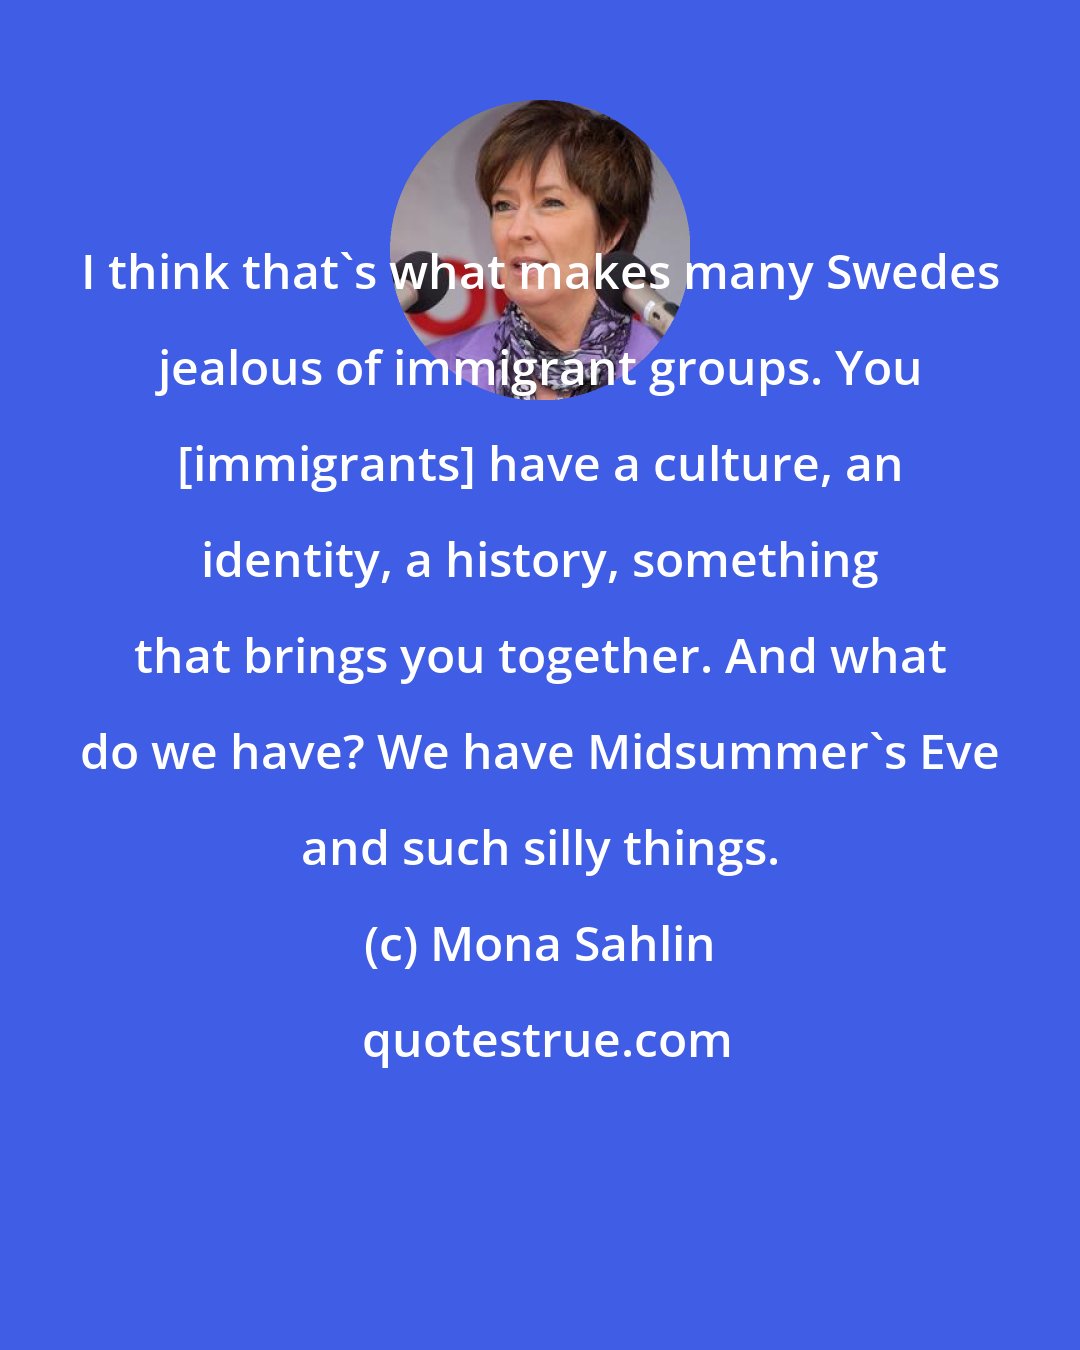 Mona Sahlin: I think that's what makes many Swedes jealous of immigrant groups. You [immigrants] have a culture, an identity, a history, something that brings you together. And what do we have? We have Midsummer's Eve and such silly things.